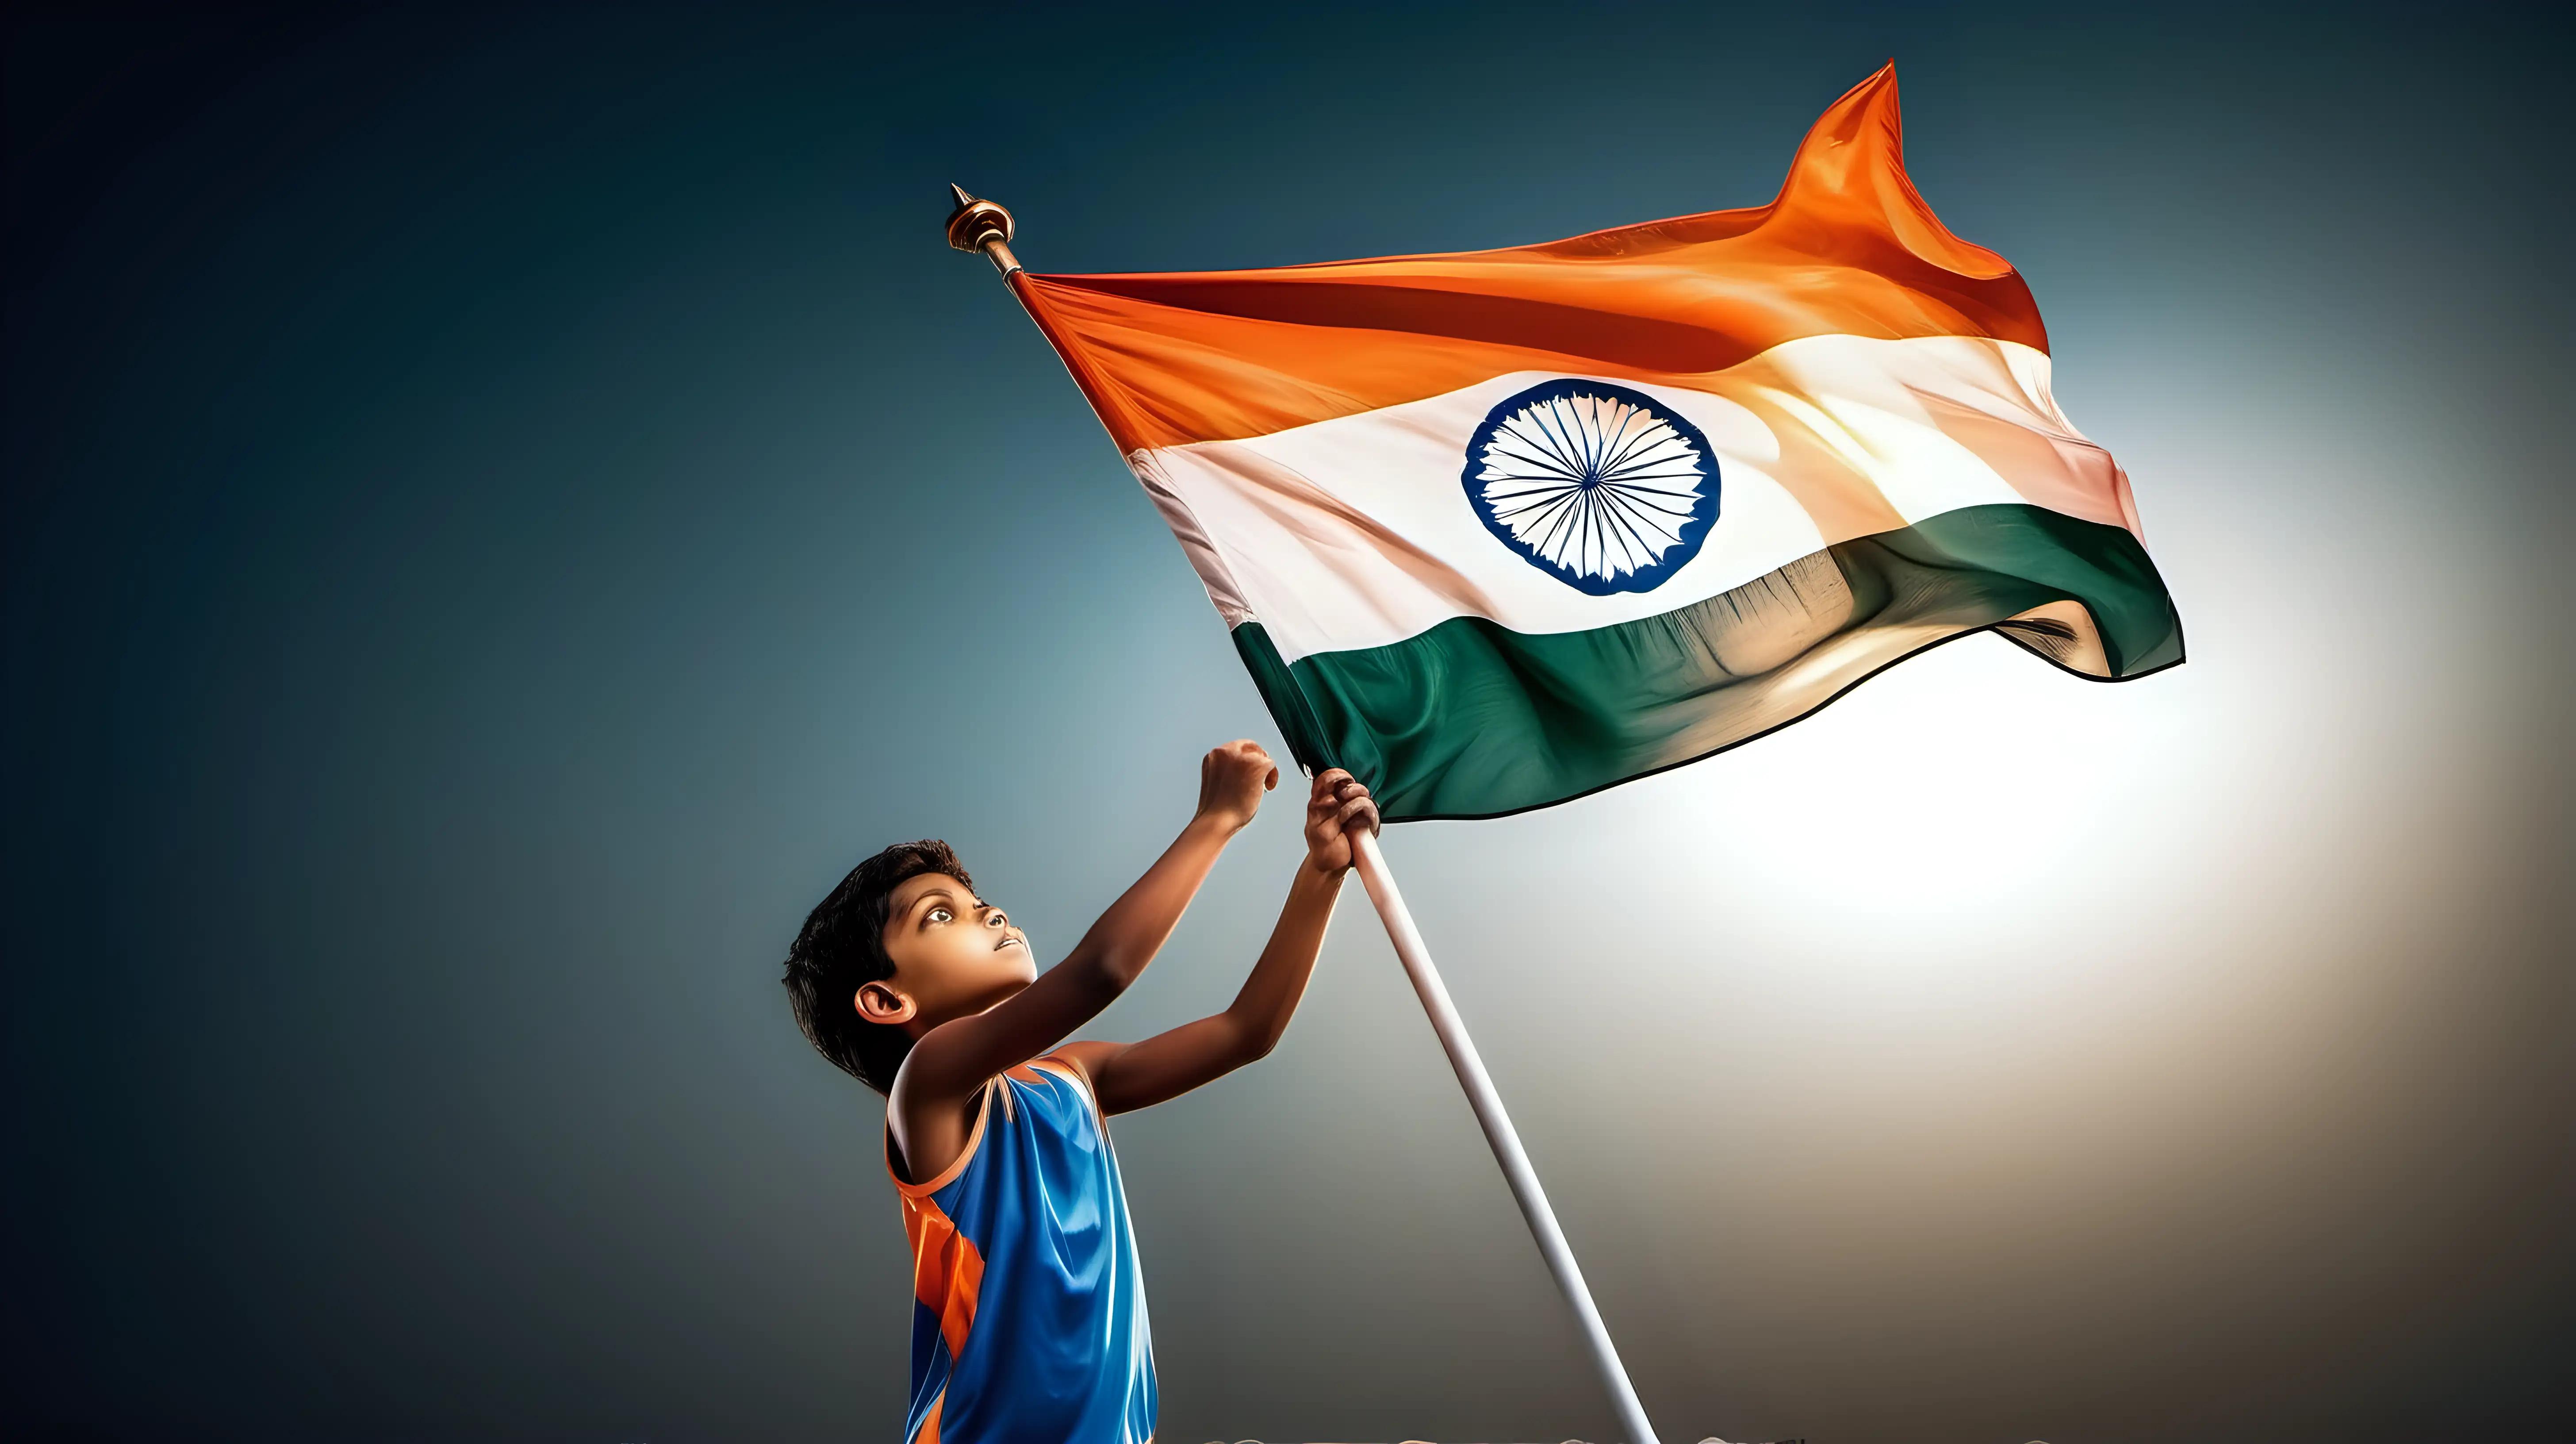 Young Athlete Proudly Raises Glowing Indian Flag in Patriotic Display of Sporting Excellence